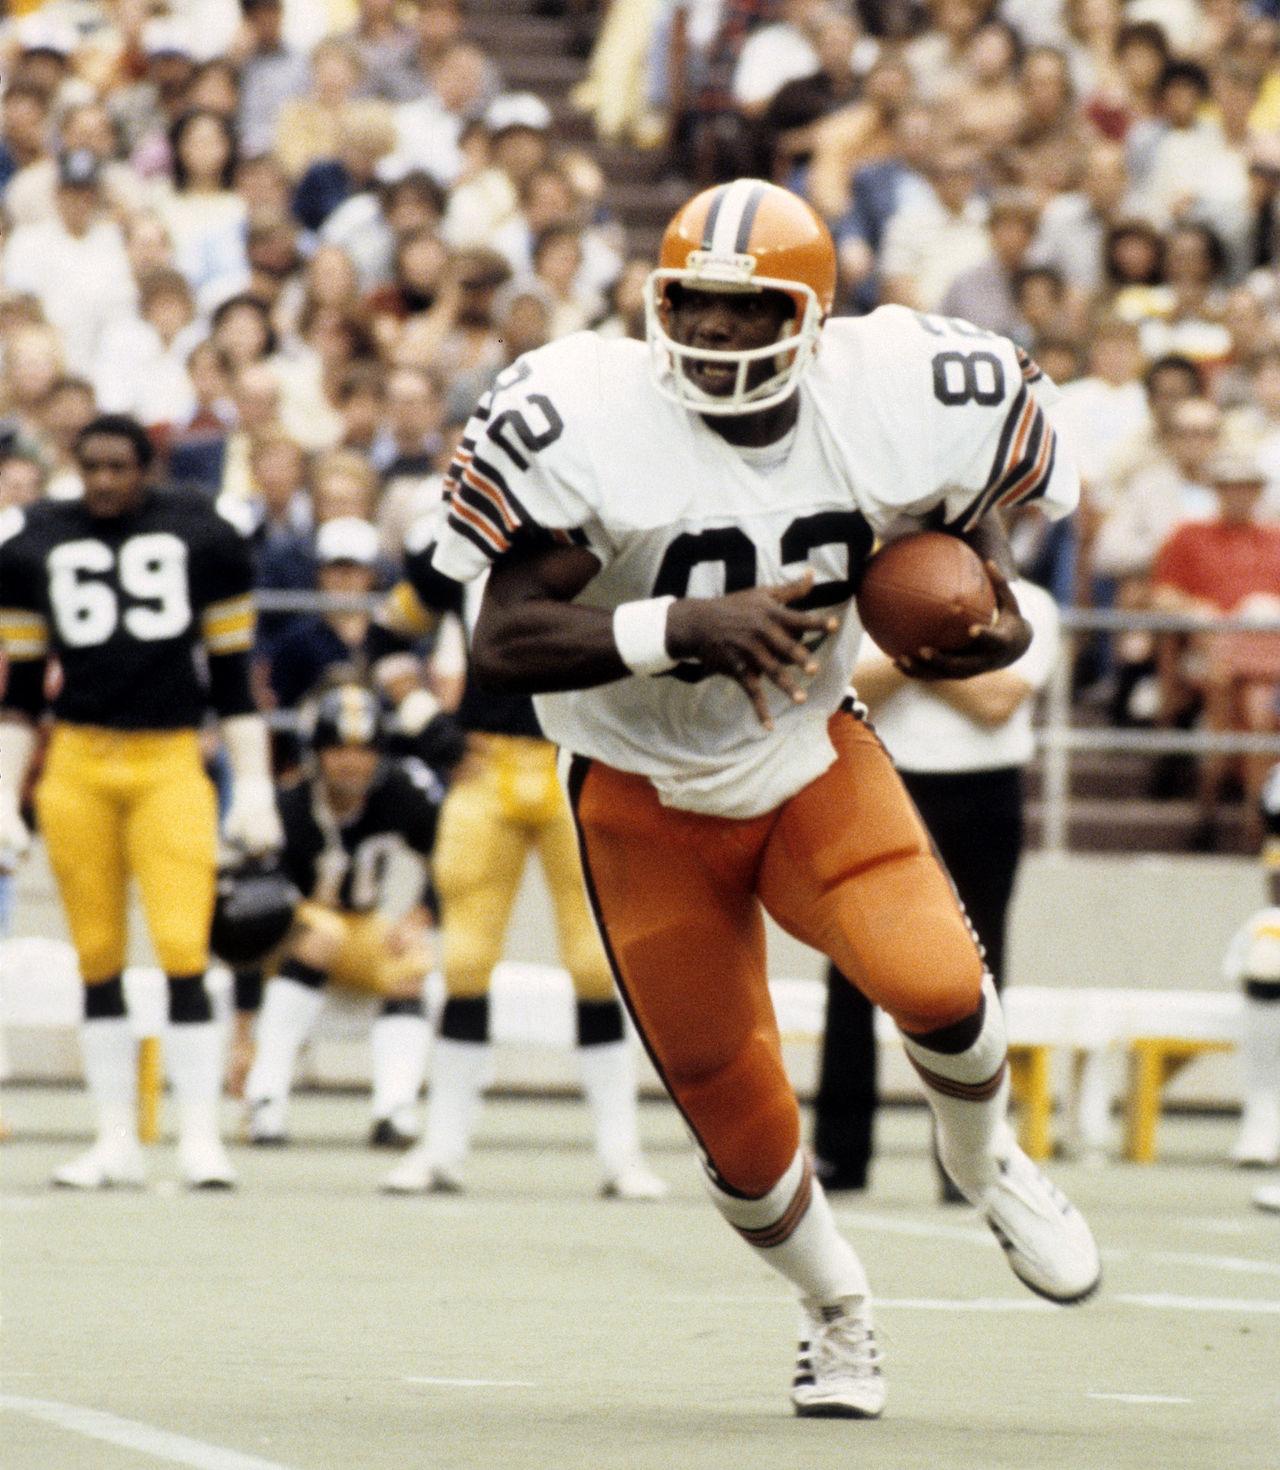 Happy BDay to lifetime member and Hall of Famer Ozzie Newsome! 